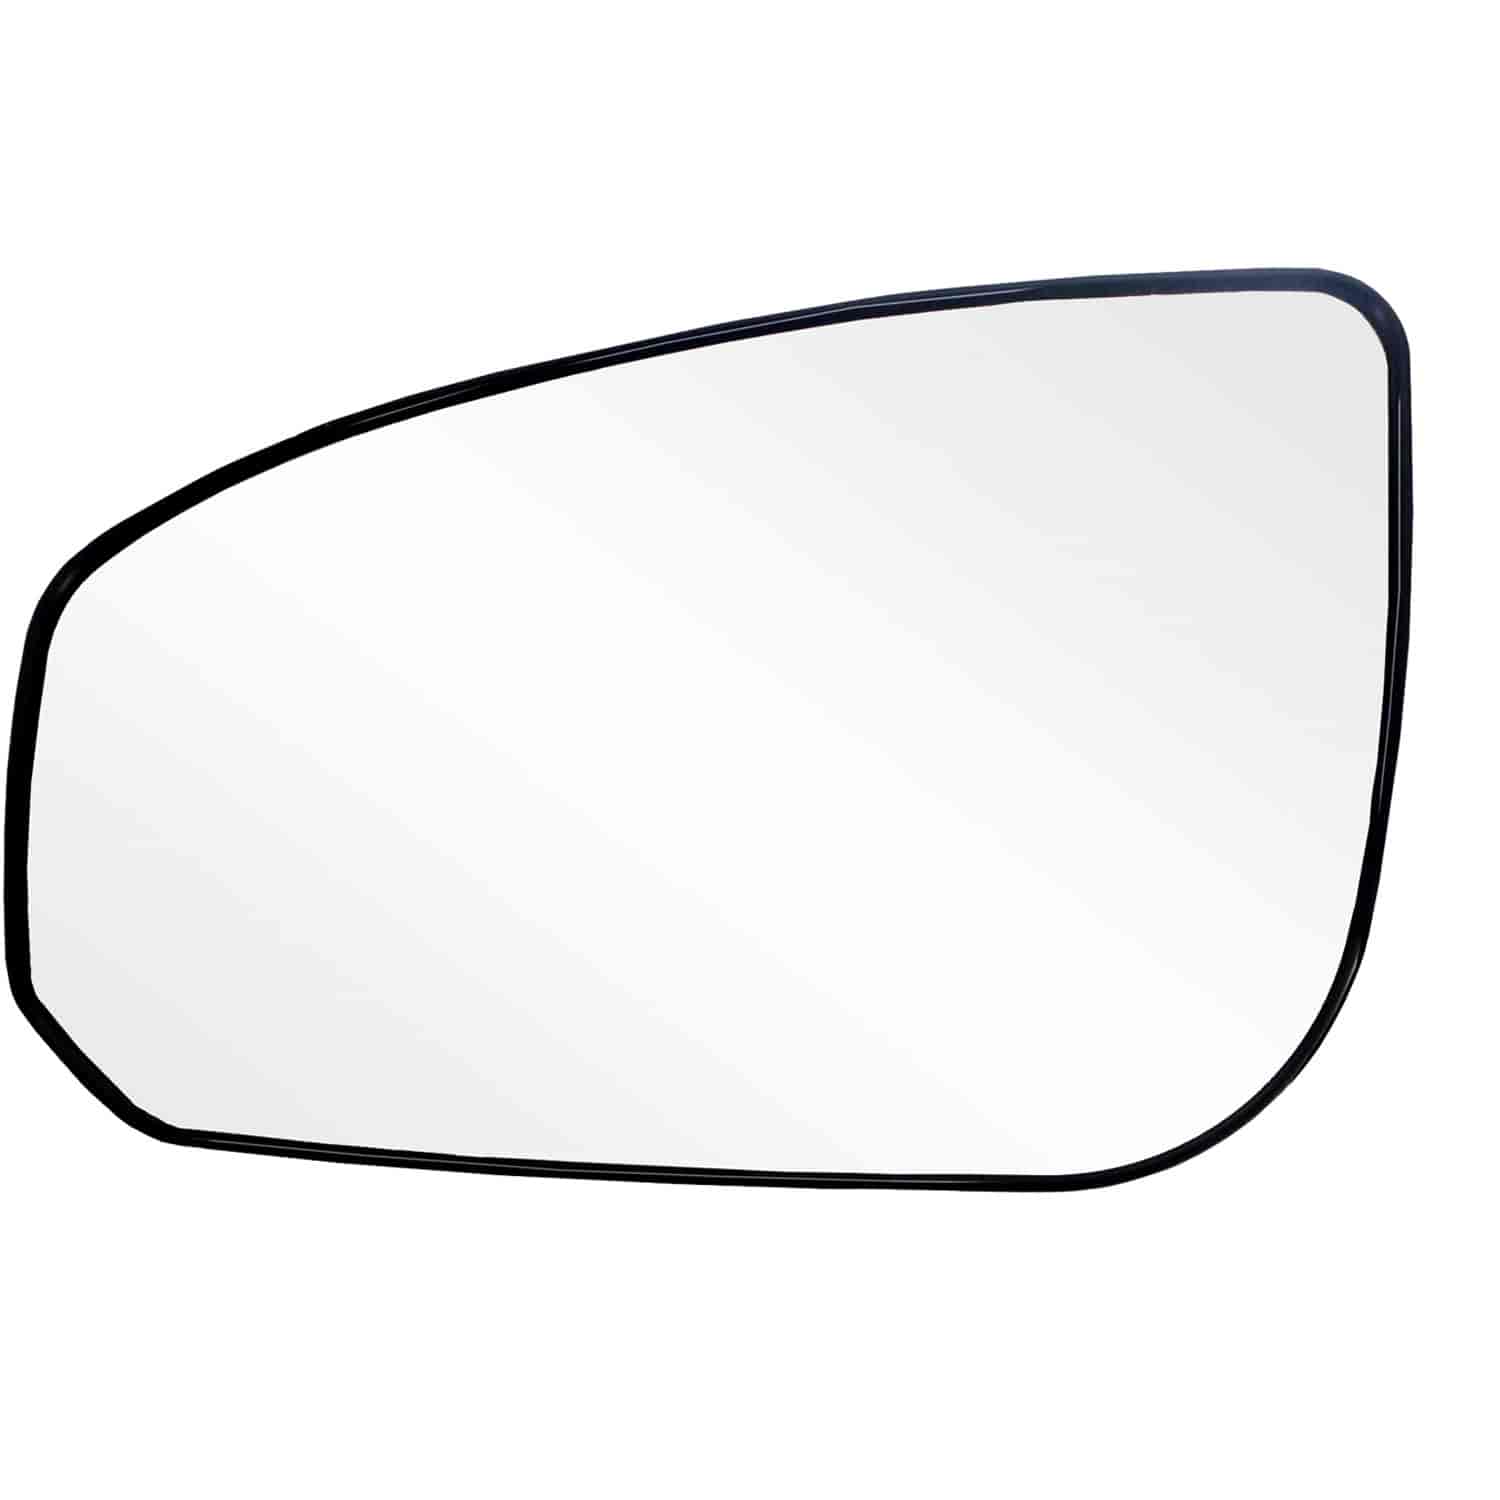 Replacement Glass Assembly for 04-08 Maxima replace your cracked or broken driver side mirror glass